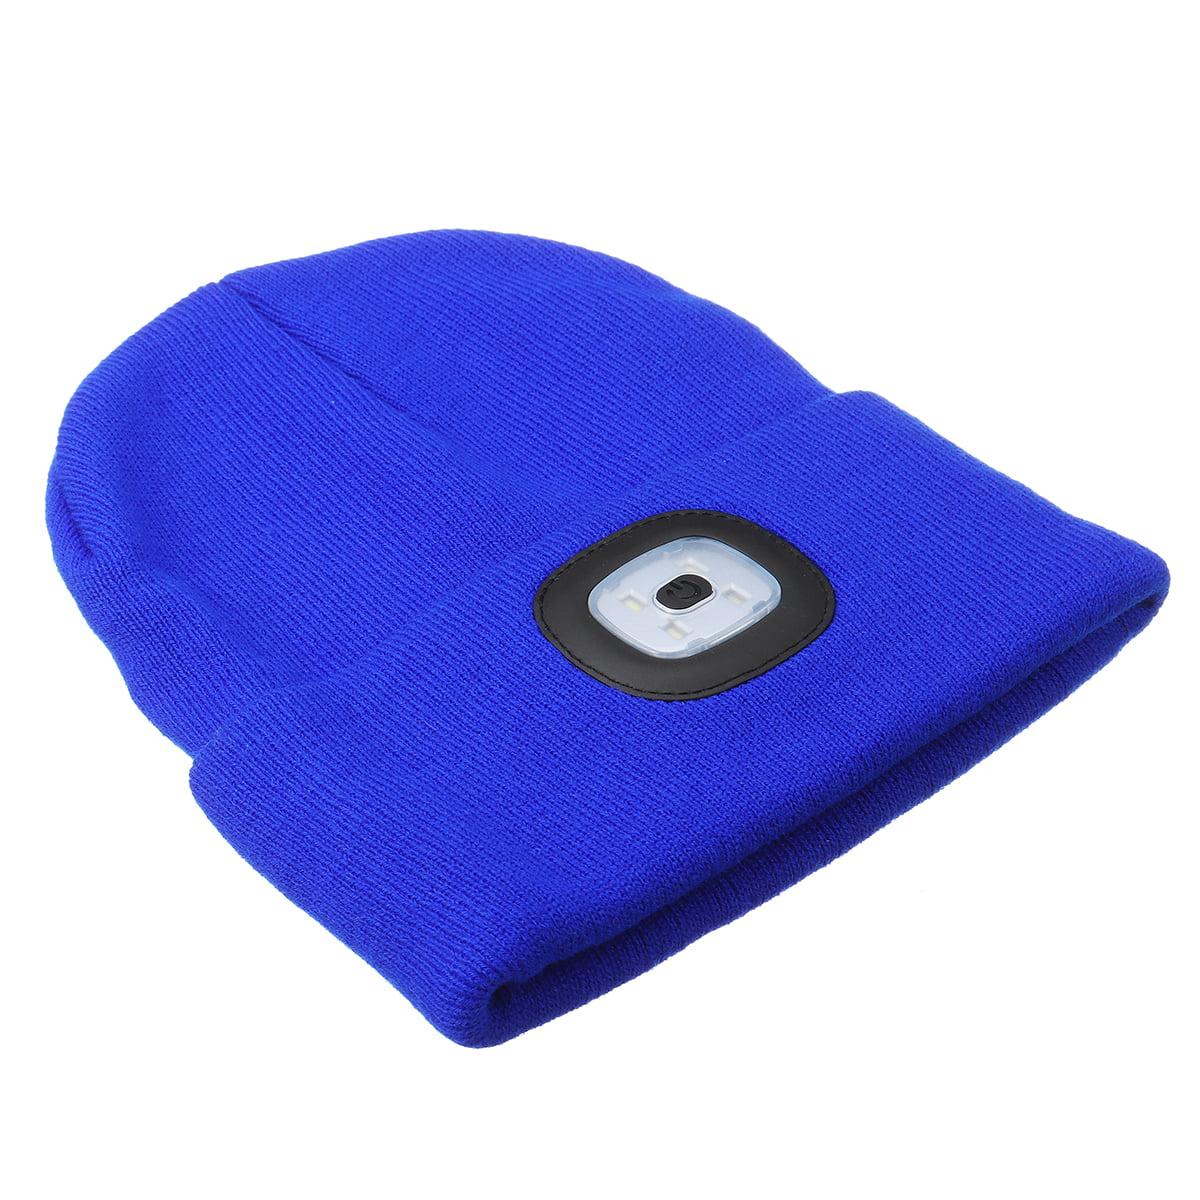 LED BEANIE HAT WITH USB RECHARGEABLE BATTERY UNISEX HIGH POWERED HEAD LAMP LIGHT 